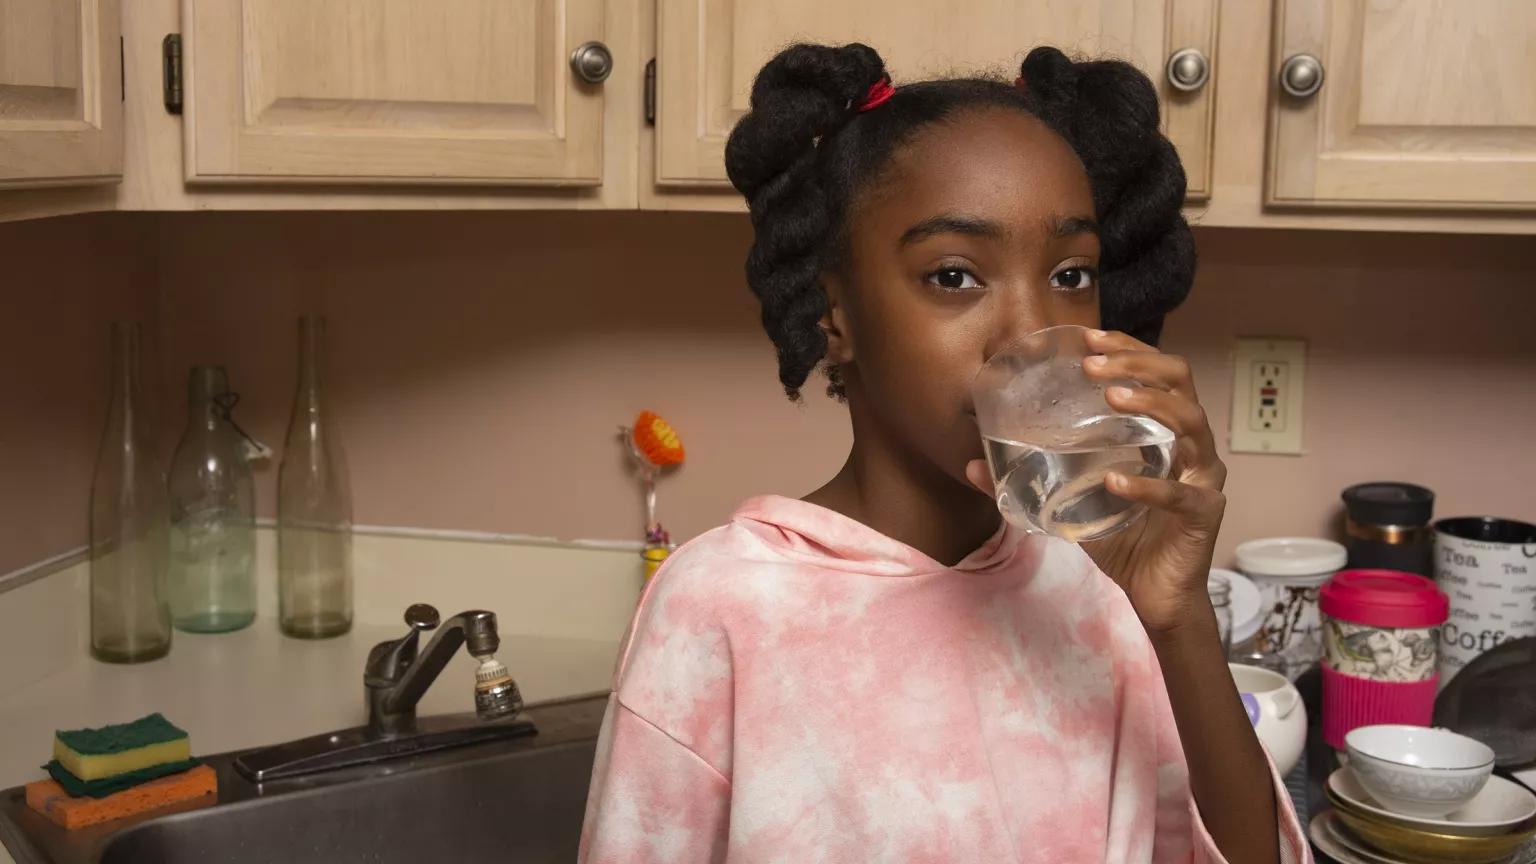 A Black pre-teen girl with braided pigtails and tie-dyed shirt is drinking a glass of tap water in front of a kitchen sink